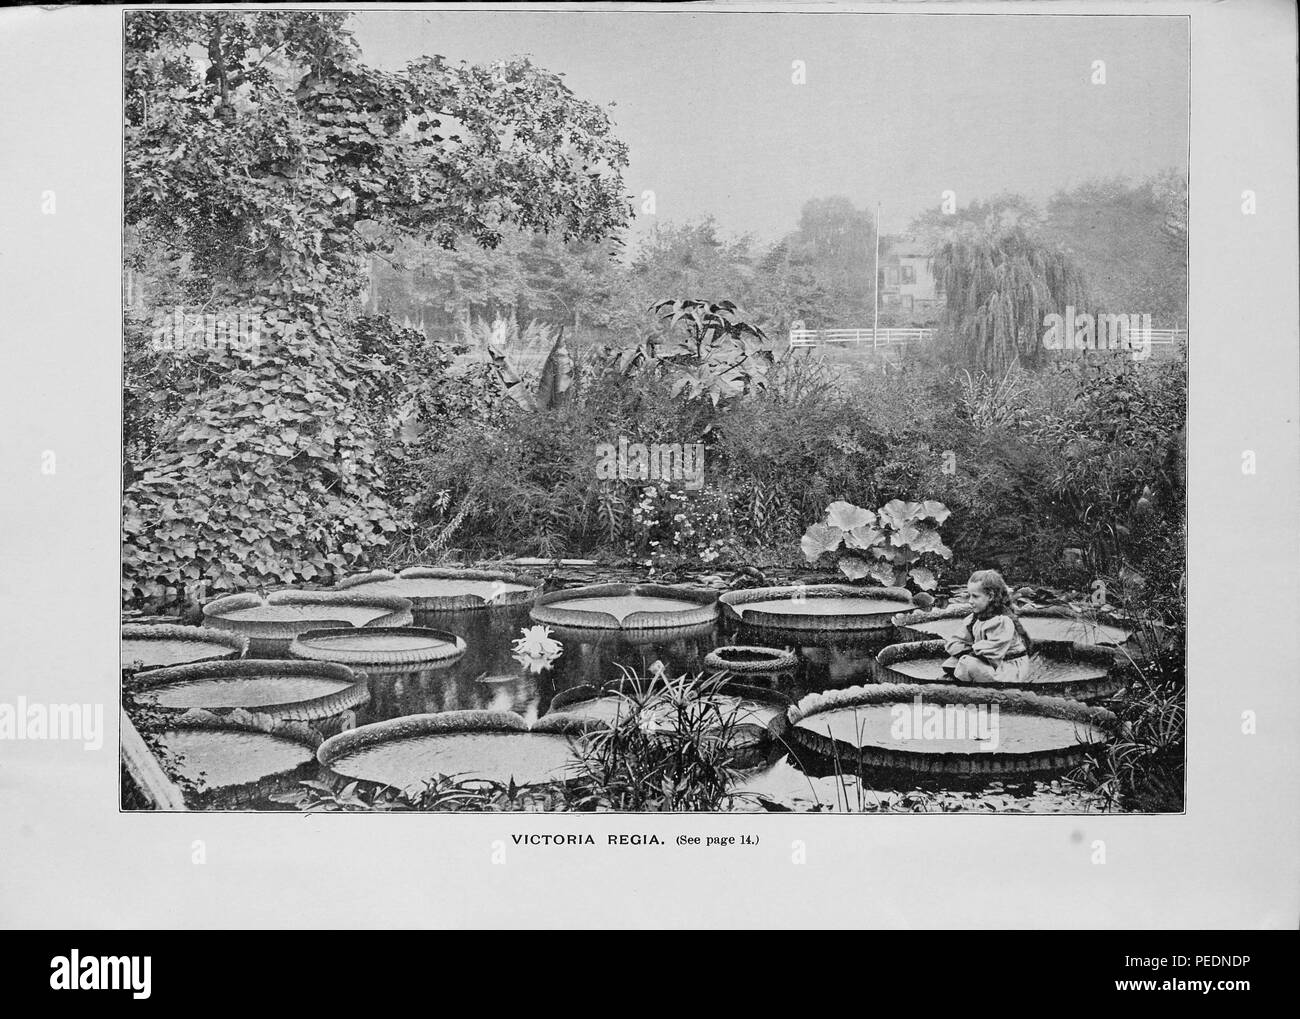 Black and white photograph of giant water lilies (Victoria amazonica) floating in a pond, with further foliage in the background, a small girl sits cross-legged on a lily-pad in the right foreground, captioned 'Victoria Regia, ' photographed at William Tricker and Company Nursery located in Clifton New Jersey, 1895. Courtesy Internet Archive. () Stock Photo